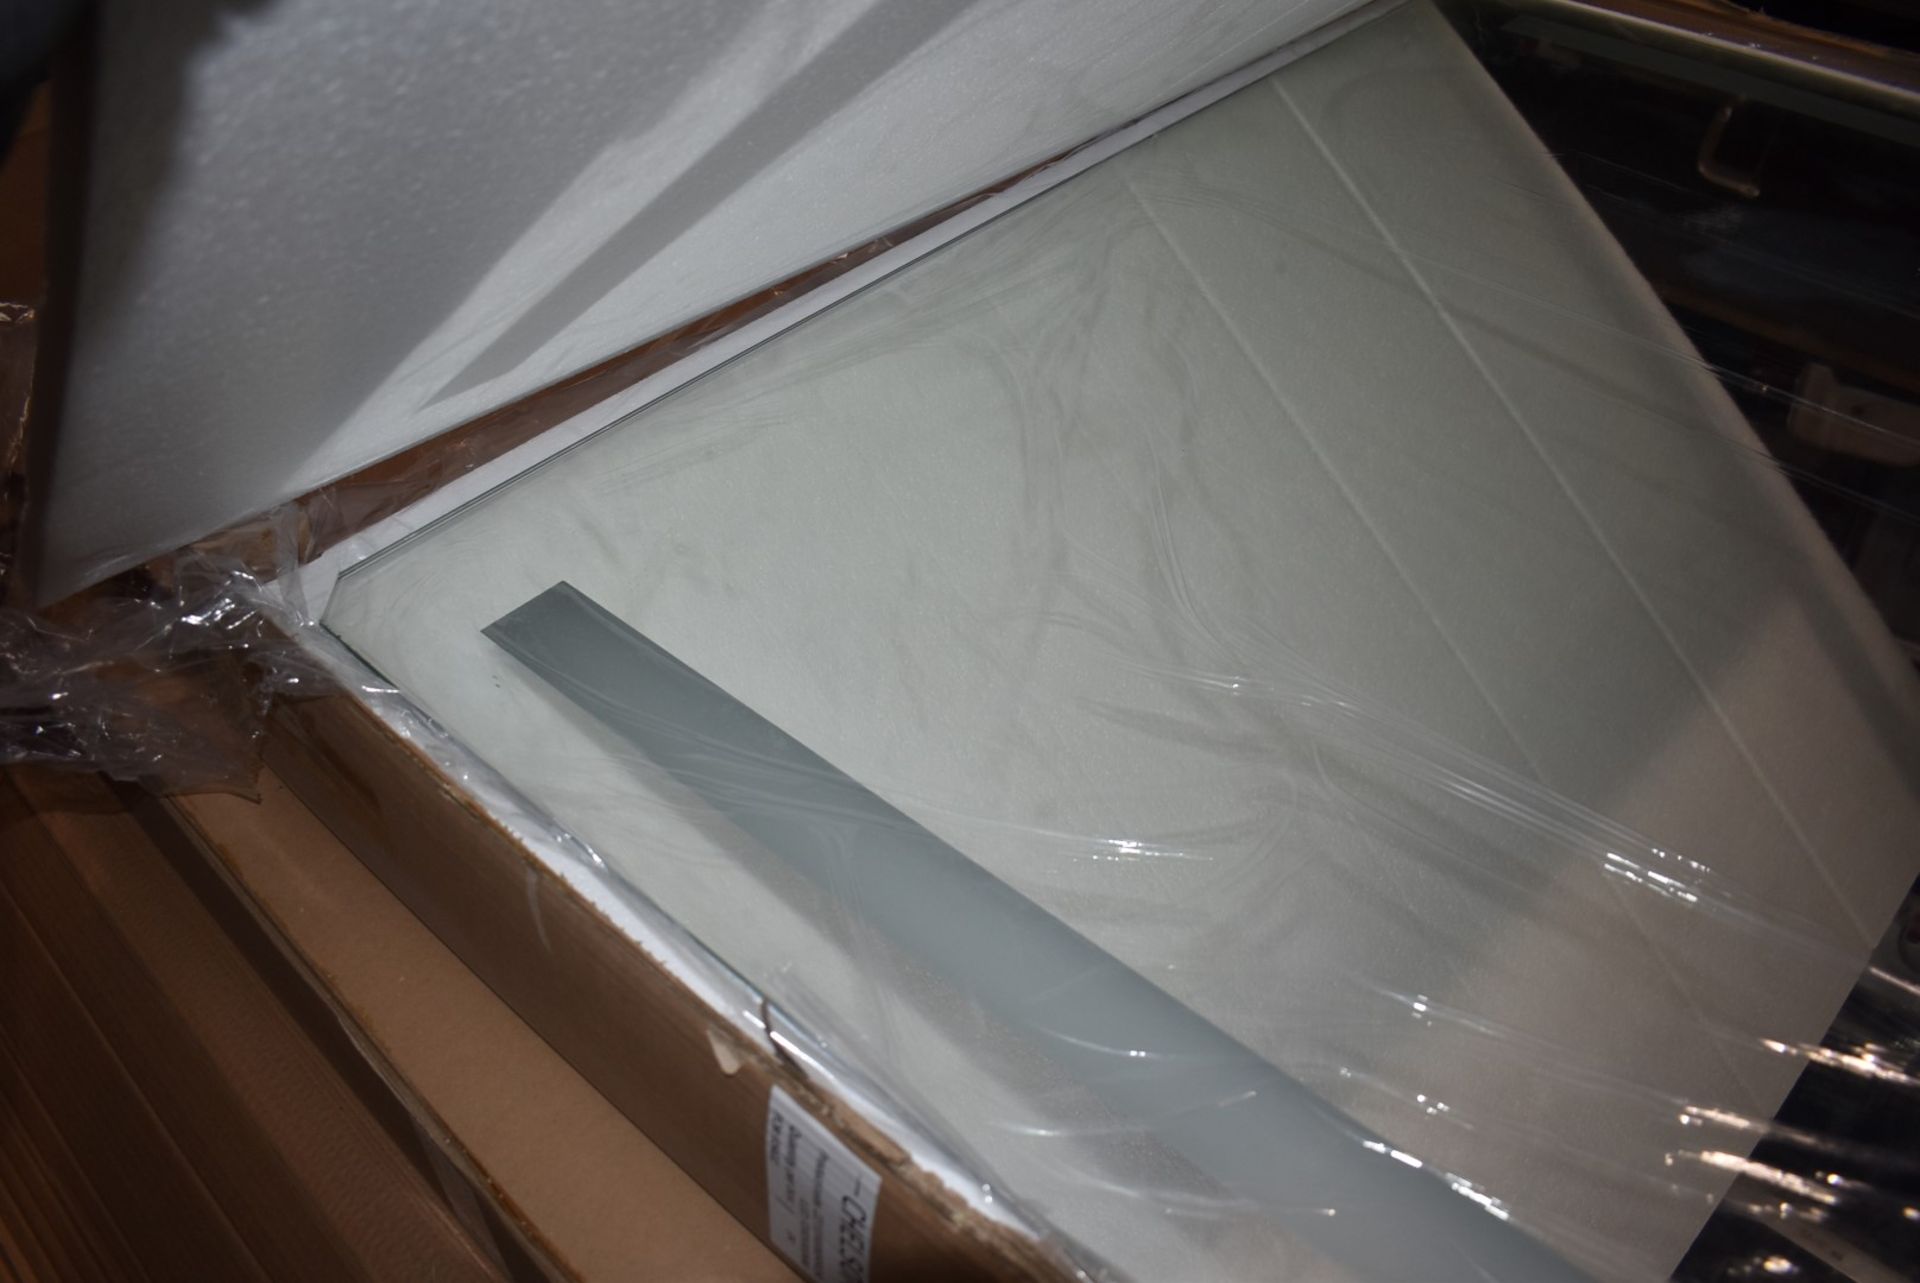 1 x Chelsom Large Illuminated LED Bathroom Mirror With Demister - Brand New Stock - As Used in Major - Image 2 of 10